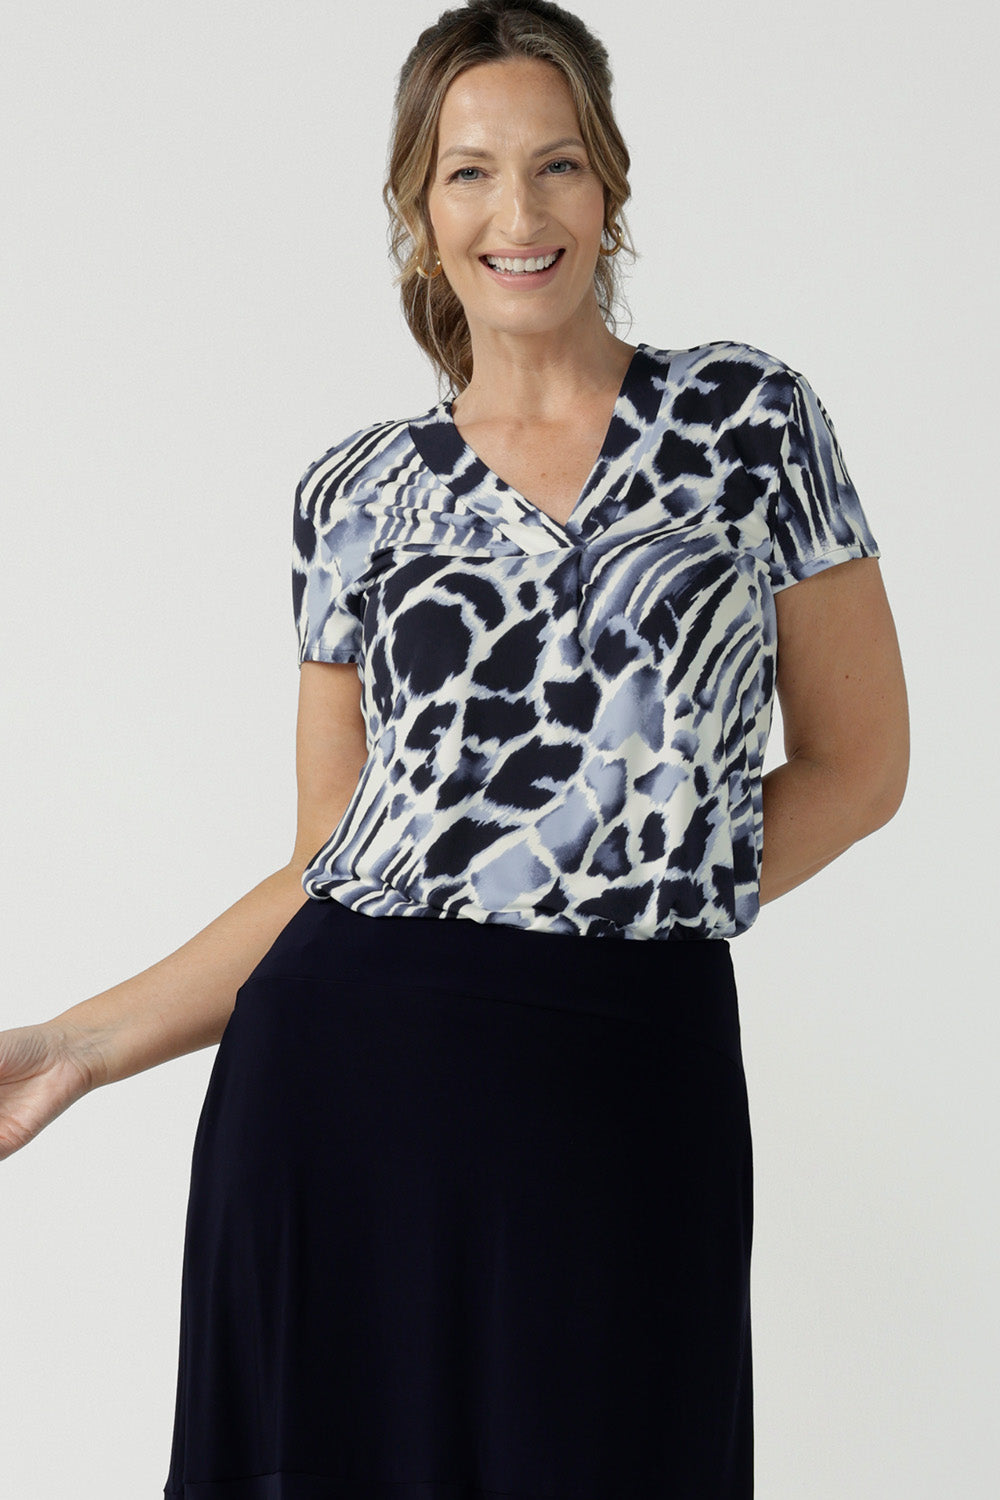 A good top for curvy women, this short sleeve V-neck top is tailored to fit women's curves. Shown on a size 10, 40 plus woman, this blue and white print jersey top is Australian-made. Wear this top for work and casual wear. Shop online in inclusive sizes 8 to 24 at Australian women's clothes brand, Leina & Fleur.